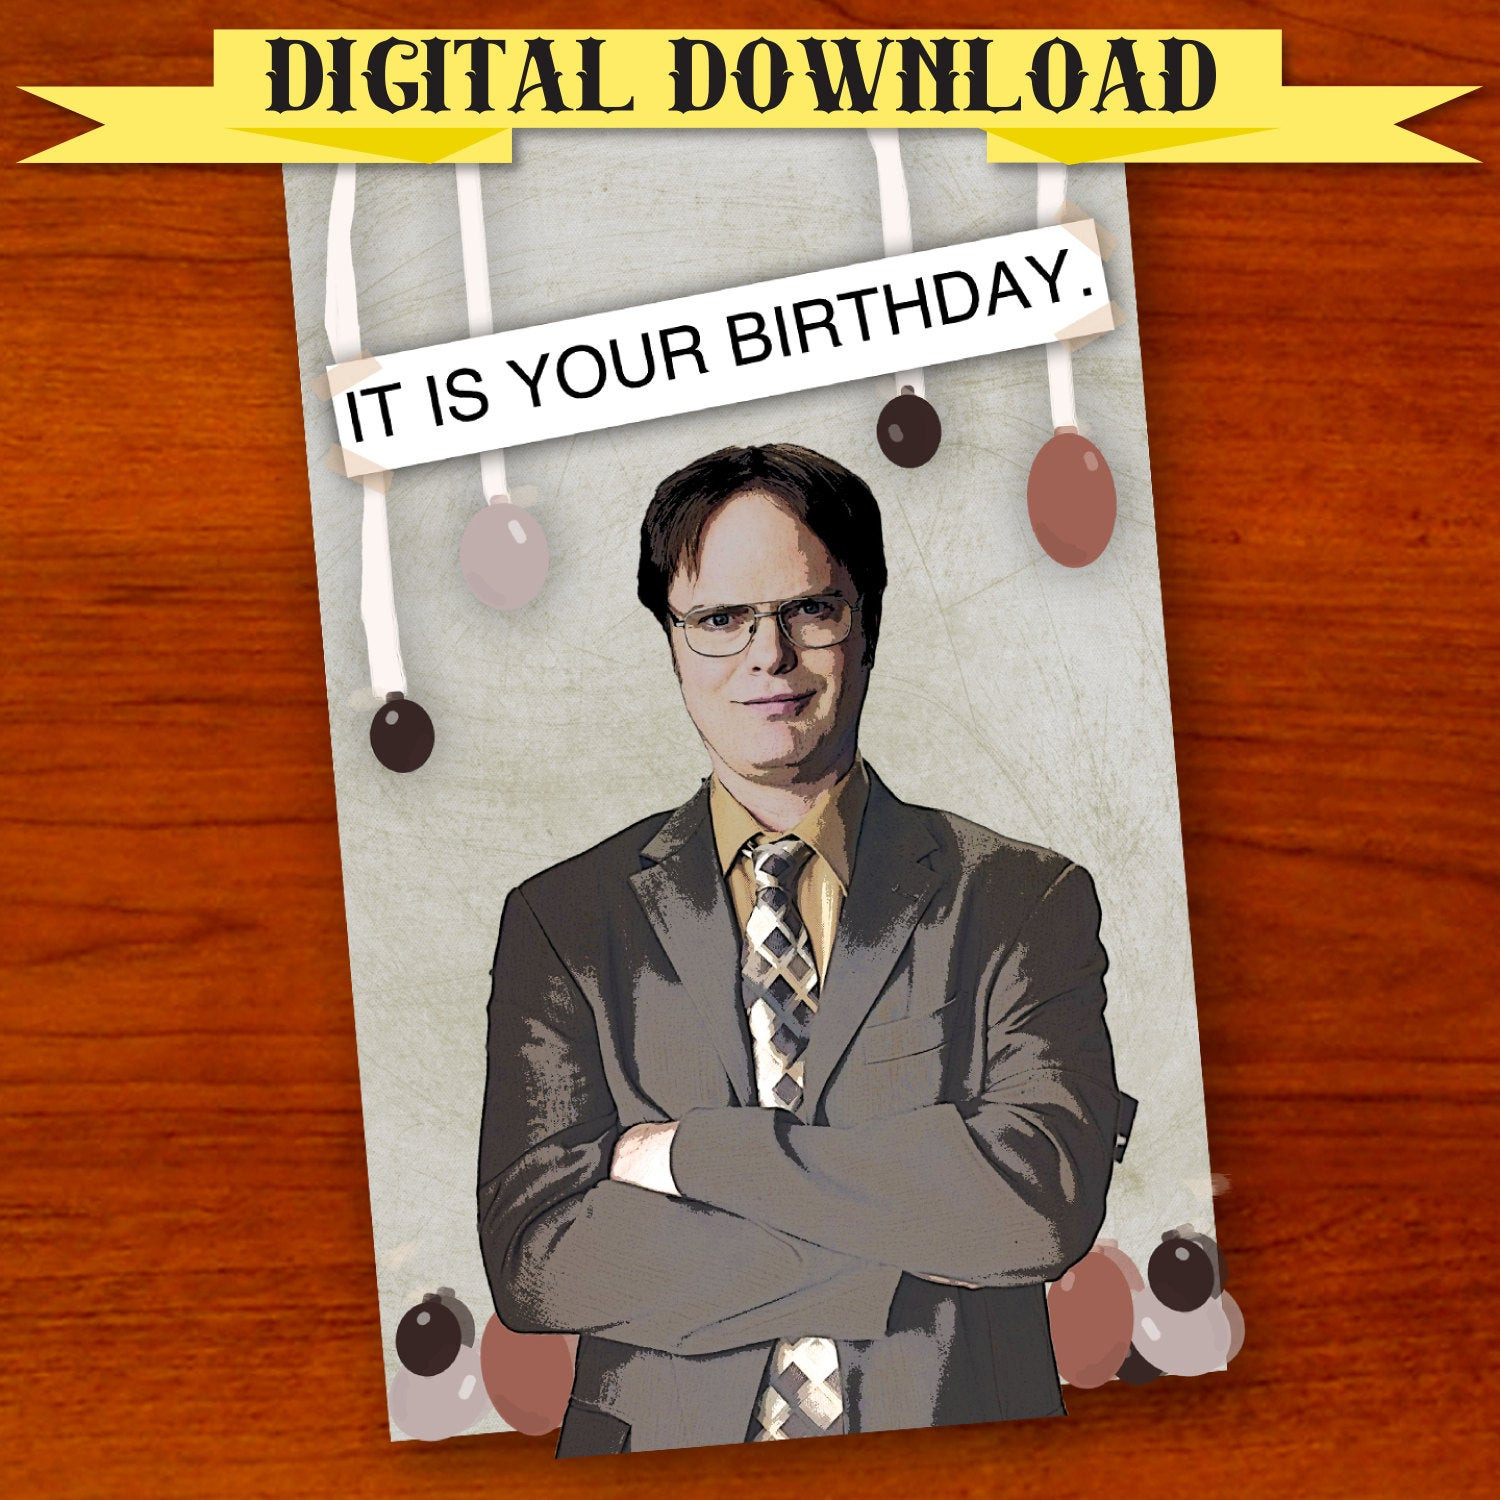 The Office Birthday Cards
 Dwight Schrute The fice Birthday Card Digital Download